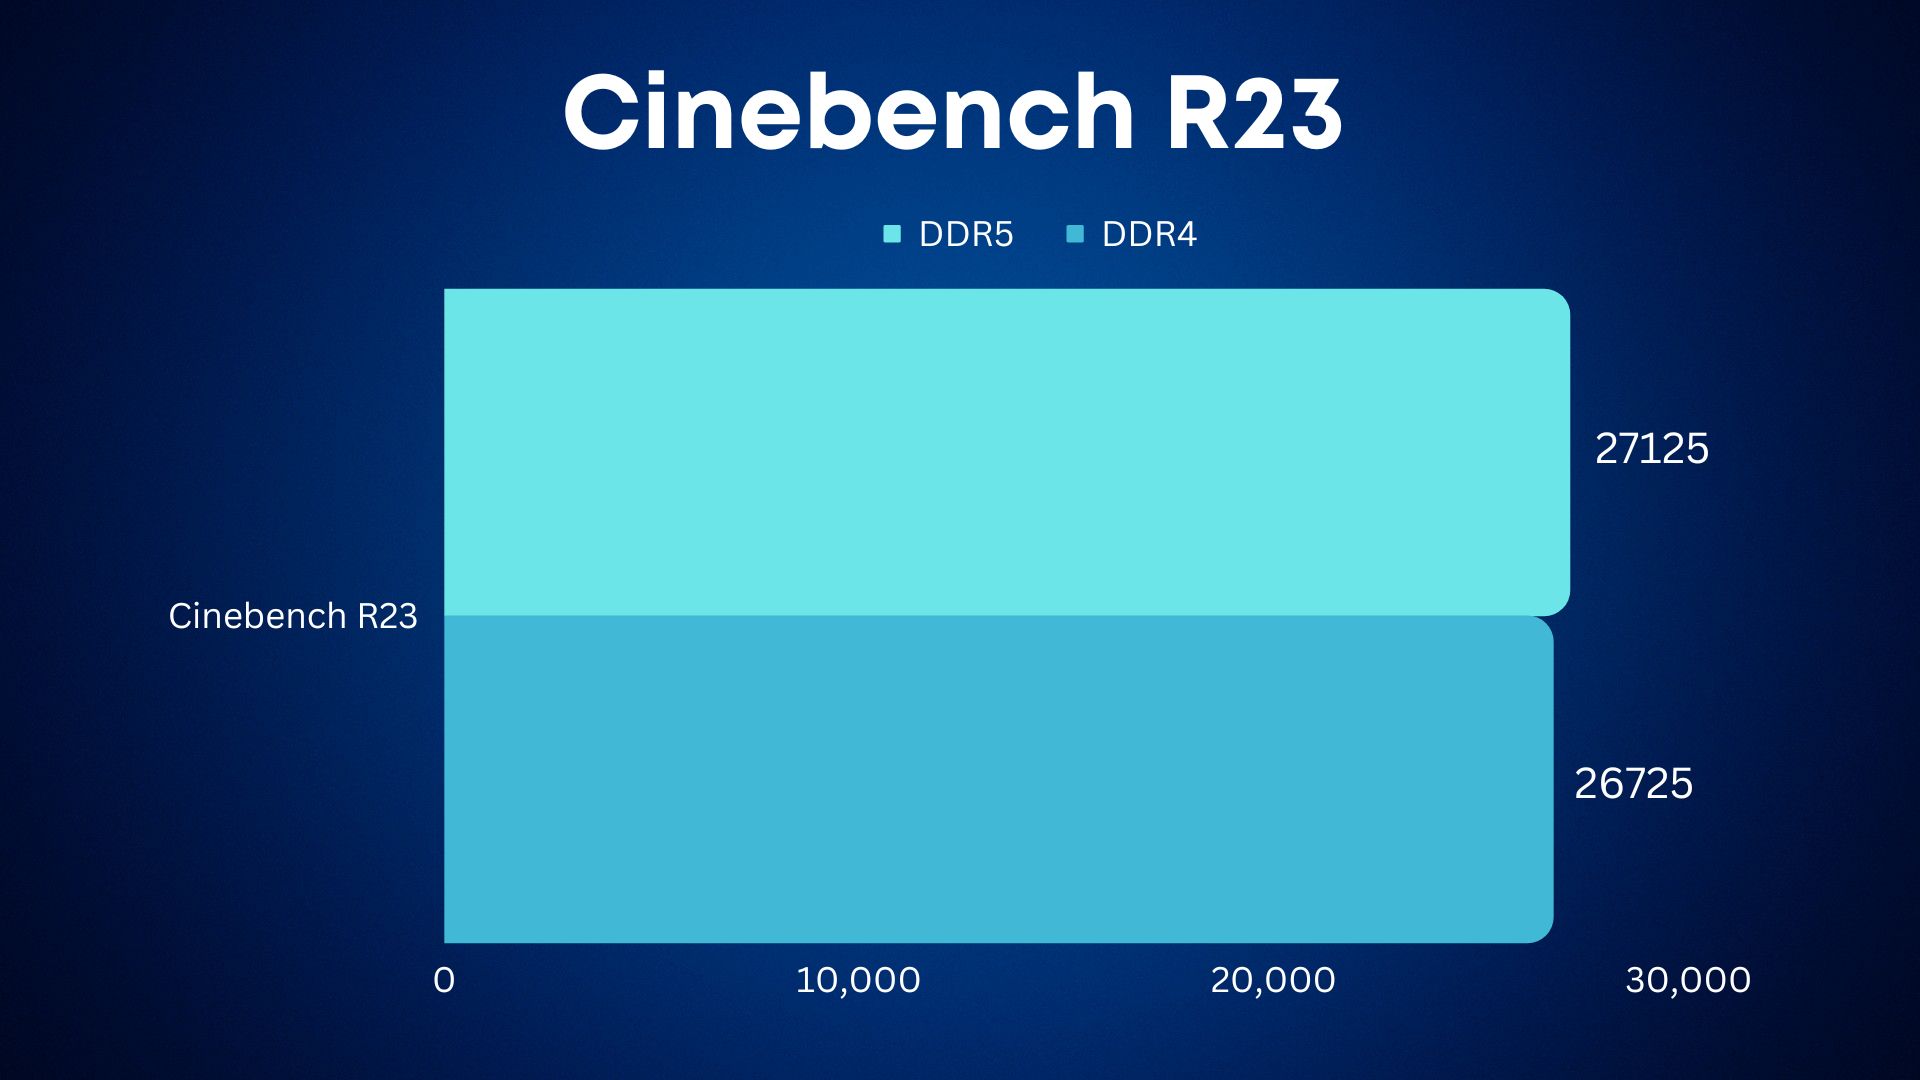 Cinebench R23 Comparison between DDR4 and DDR5 RAM